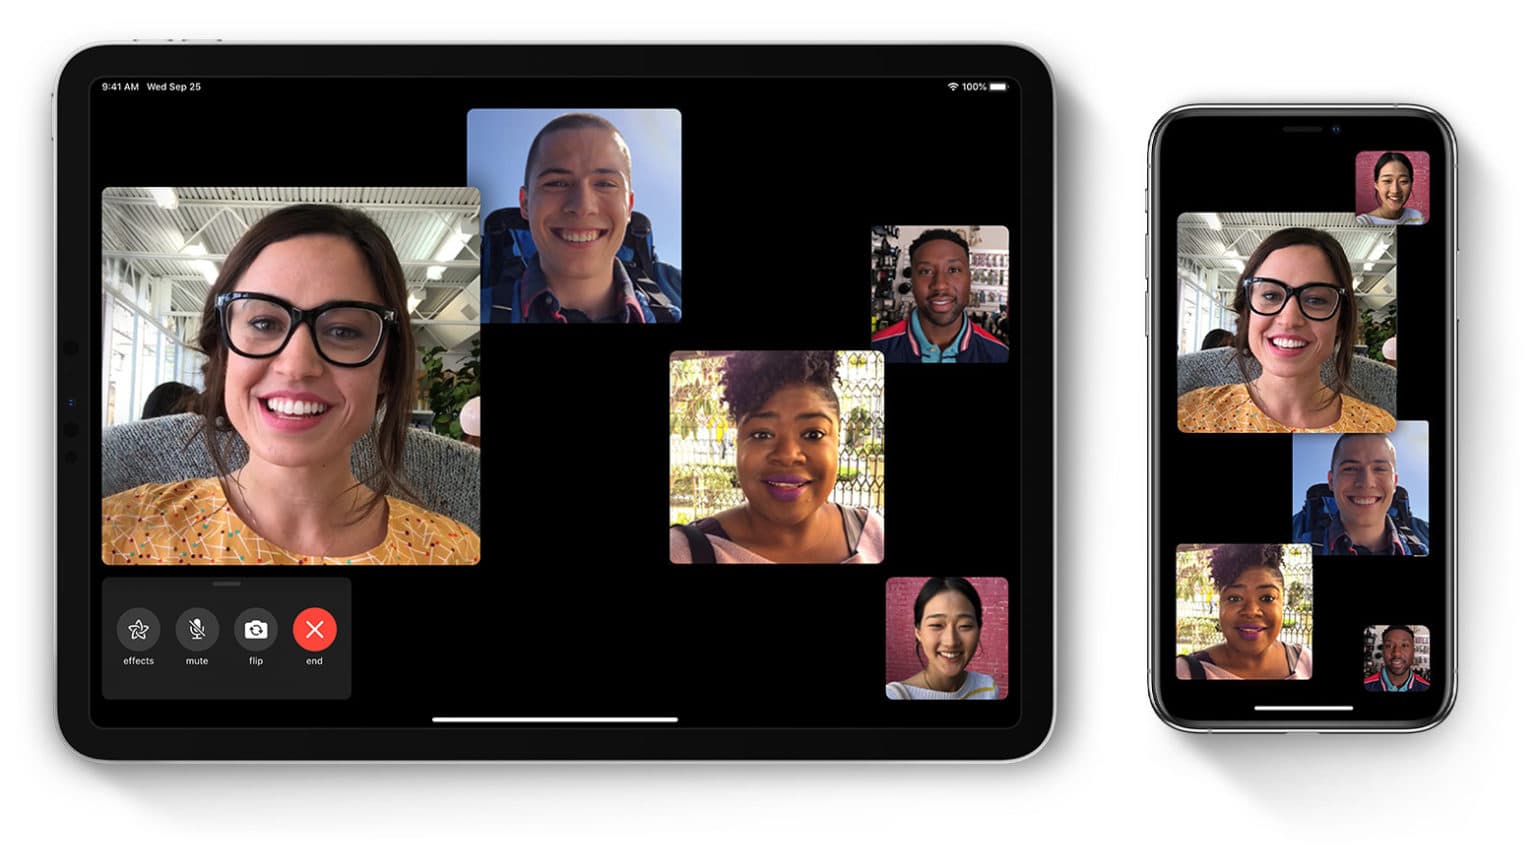 Group FaceTime is a great way to stay in touch with your family and friends during coronavirus quarantine.